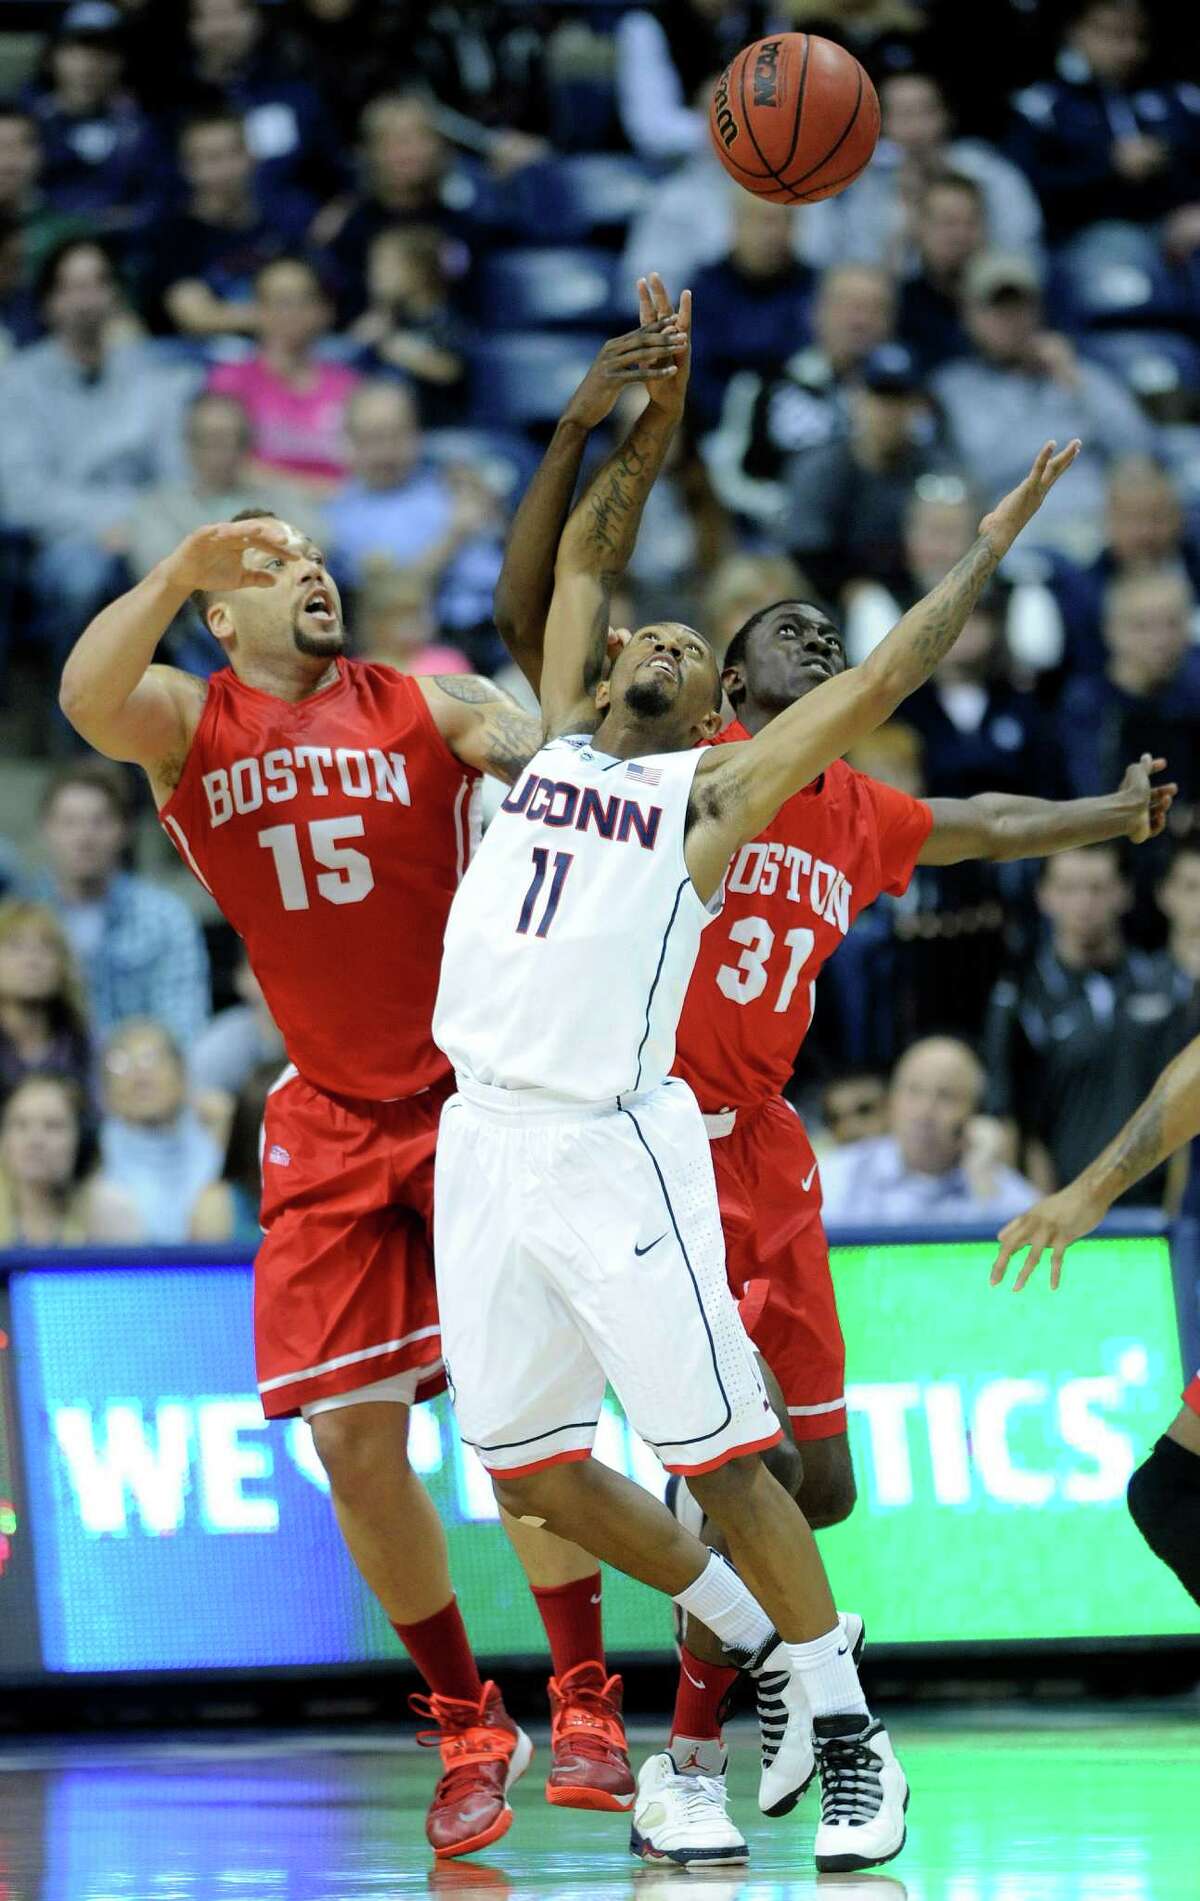 Boston University's Dom Morris (15) and Malik Thomas (31) fight for a rebound with Connecticut's Ryan Boatright (11) during the first half of an NCAA college basketball game in Storrs, Conn., on Sunday, Nov. 17, 2013.